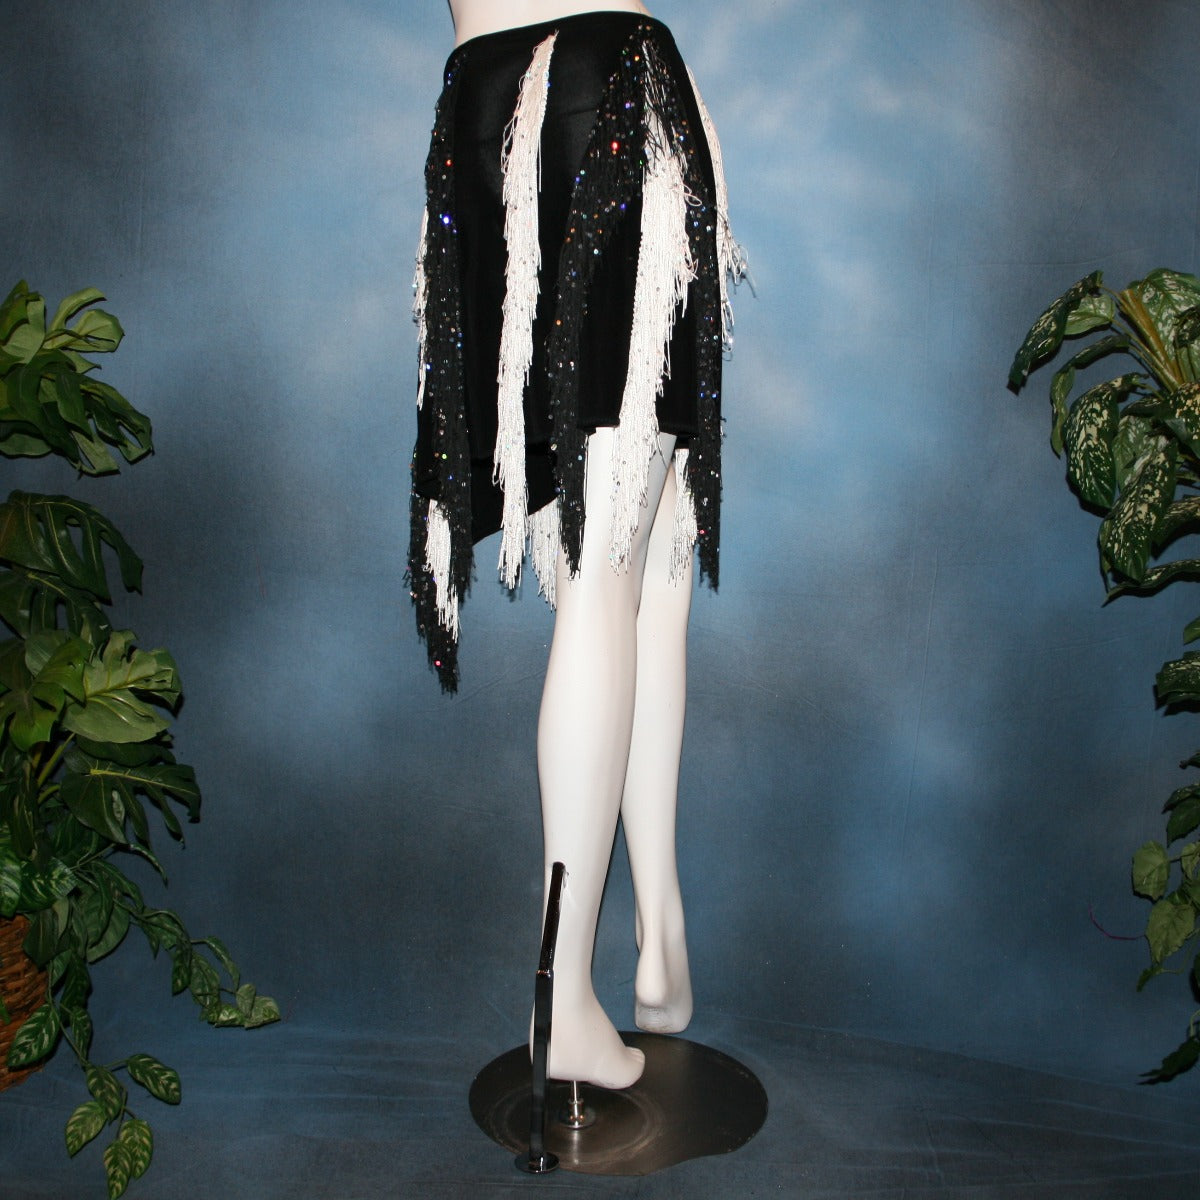 back view of Black & white Latin/rhythm skirt created of luxurious black solid slinky with vertical rows of black & white hologram sequined fringe, would pair greatly with a simple black bodysuit....or a custom created bodysuit or two would be fabulous for versatility, one on the simple classic side & one fabulously ornate with Swarovski rhinestone work!   